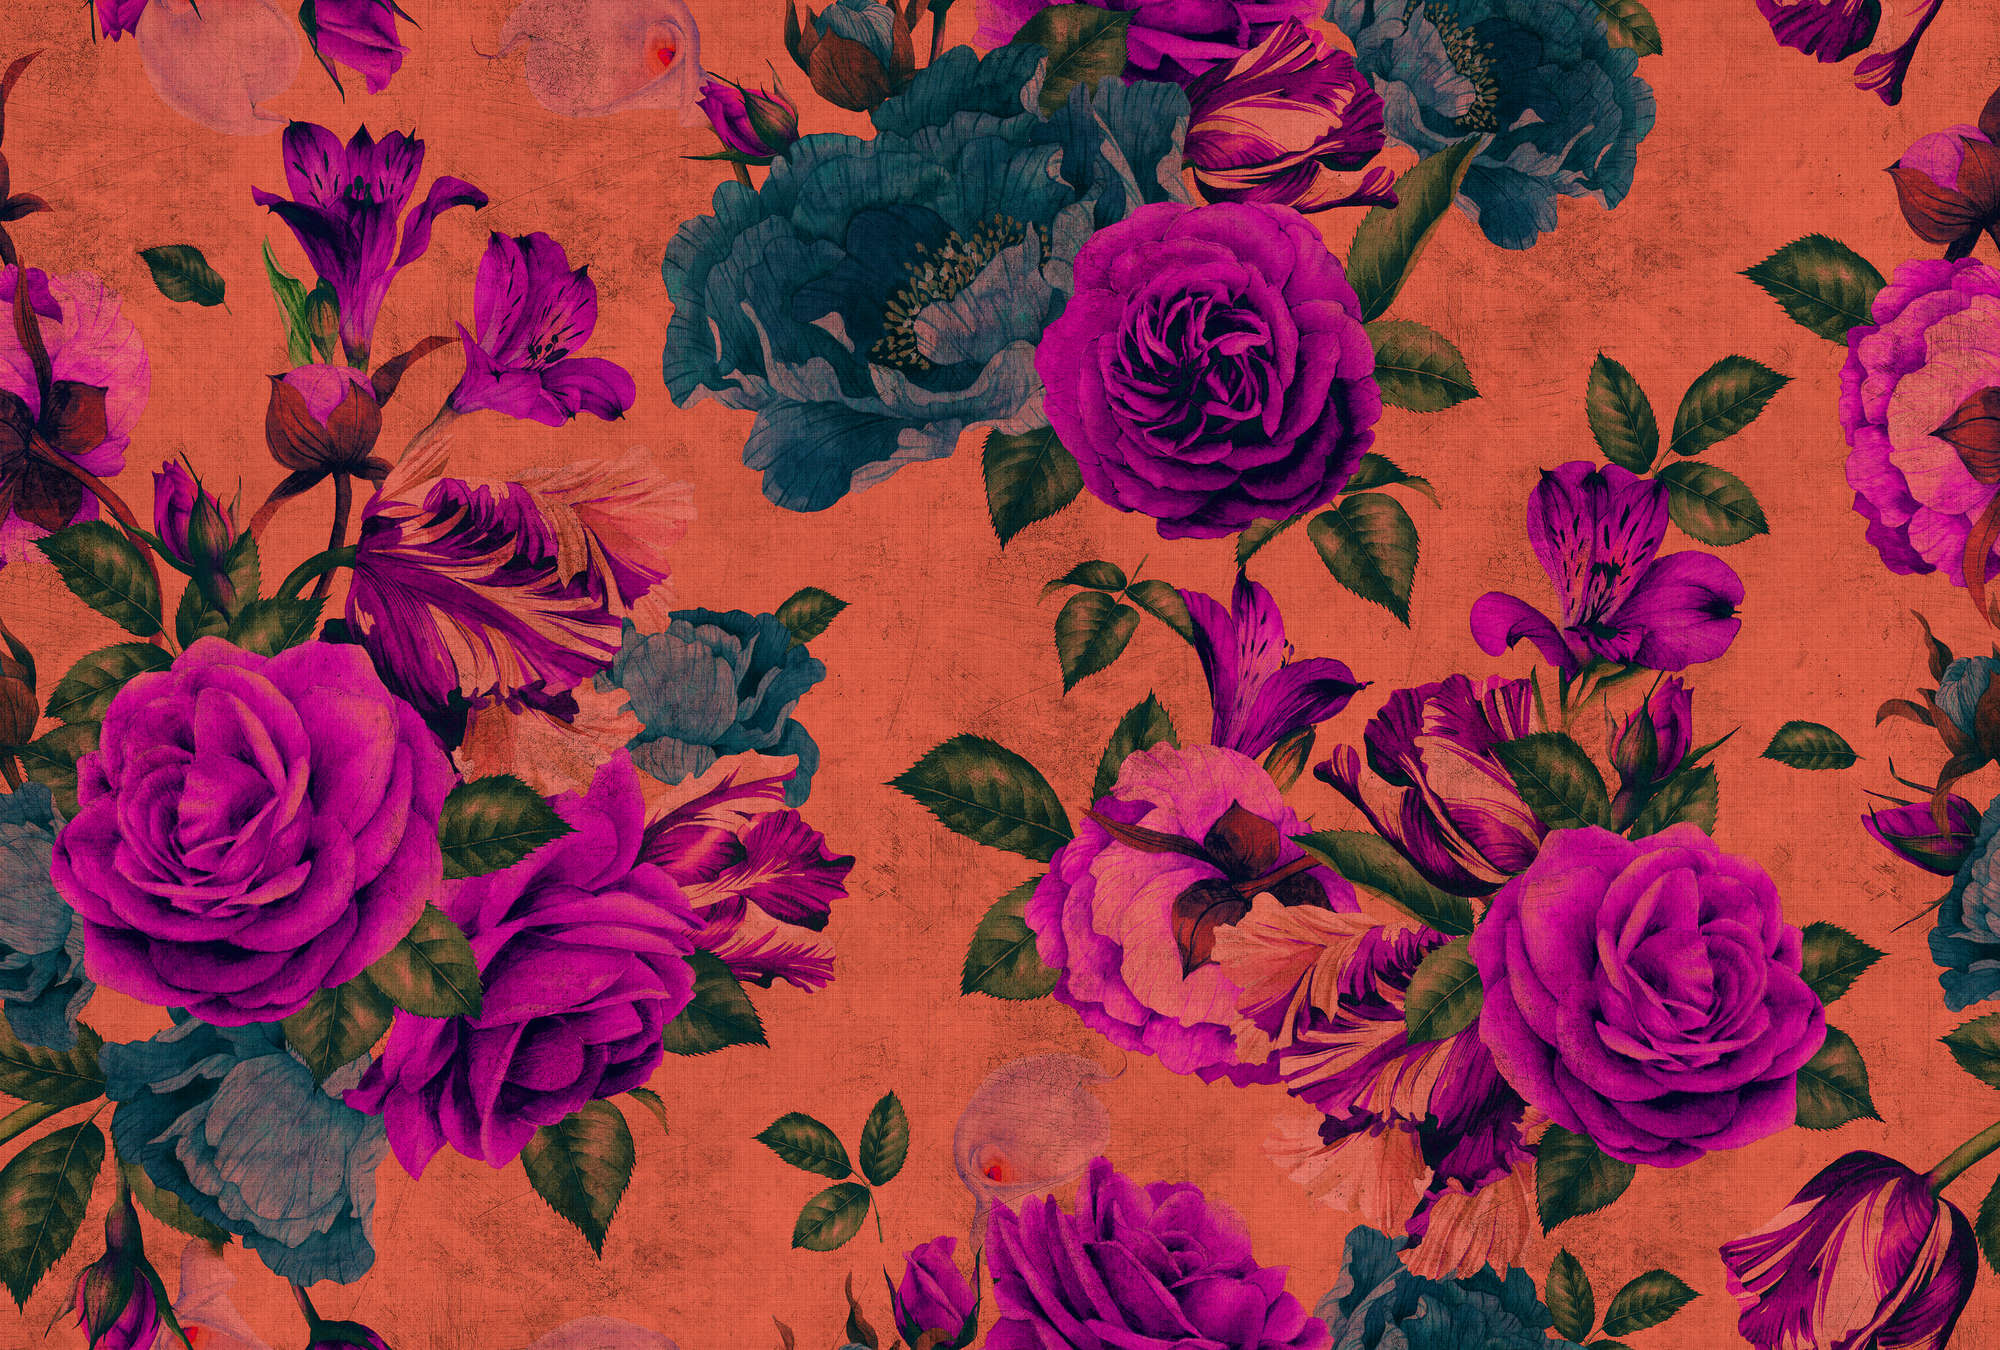             Spanish rose 2 - Rose petals wallpaper, natural structure with bright colours - orange, violet | mother-of-pearl smooth fleece
        